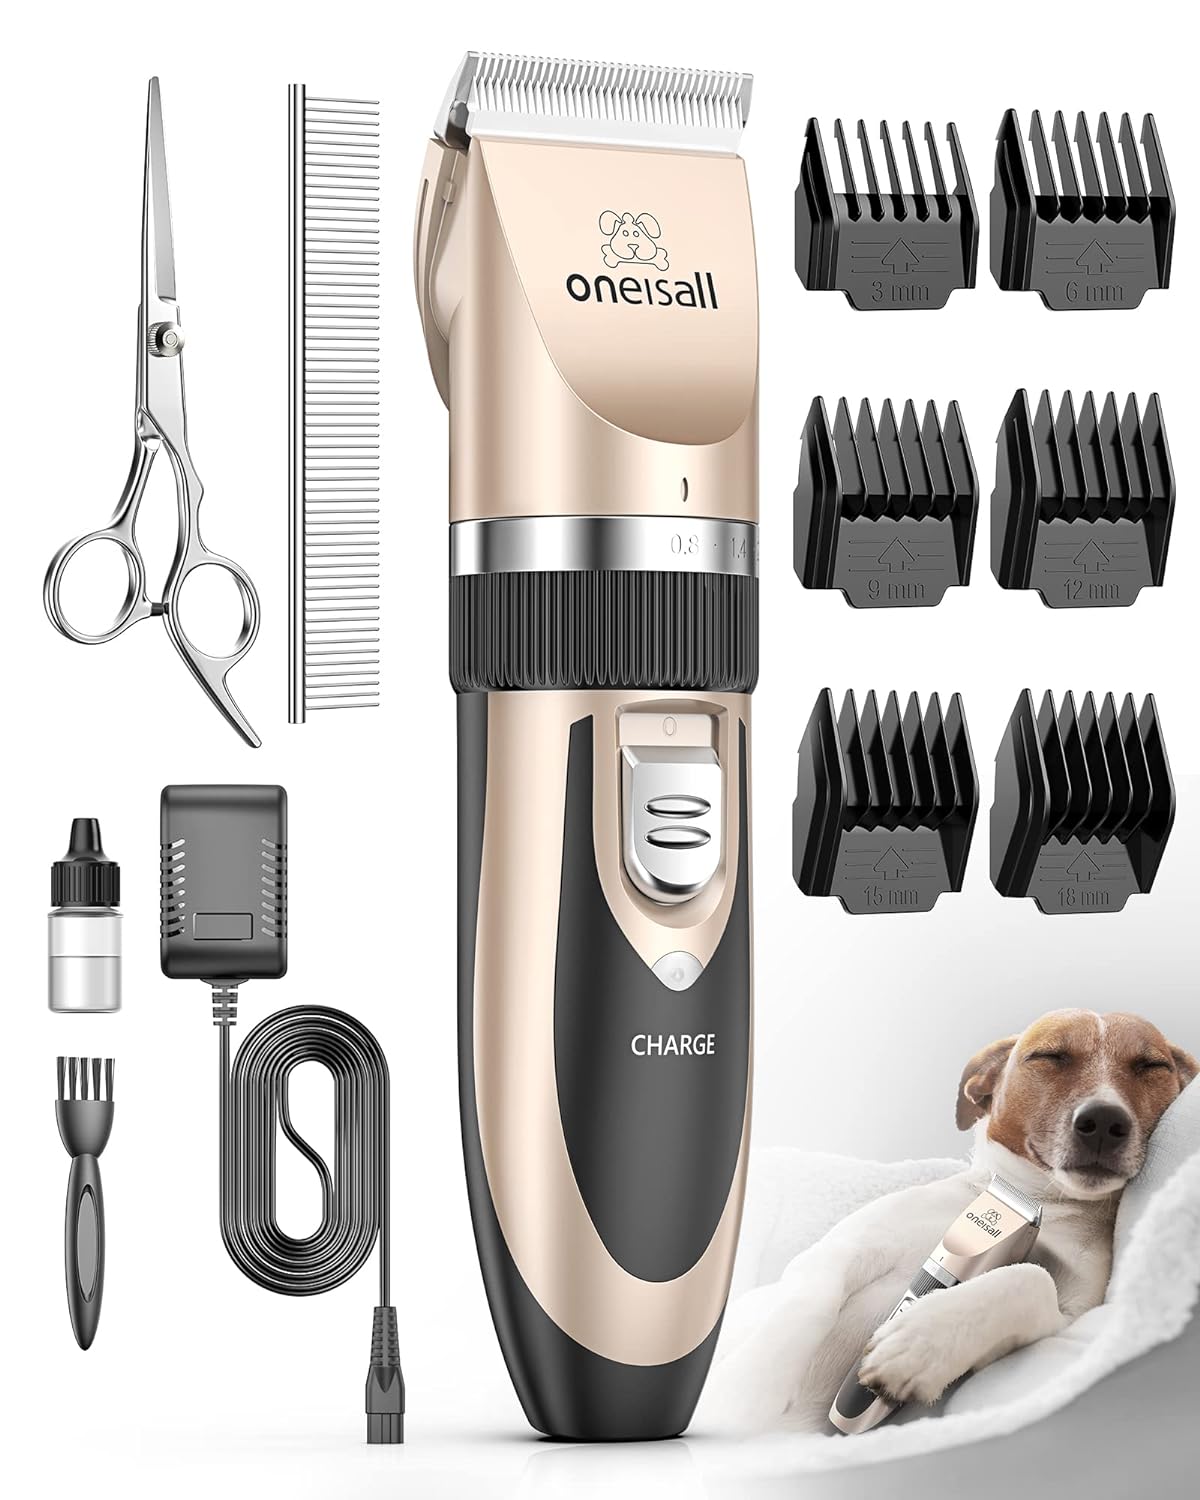 Best Dog Clipper: Top 5 Clippers for Grooming Your Furry Friend